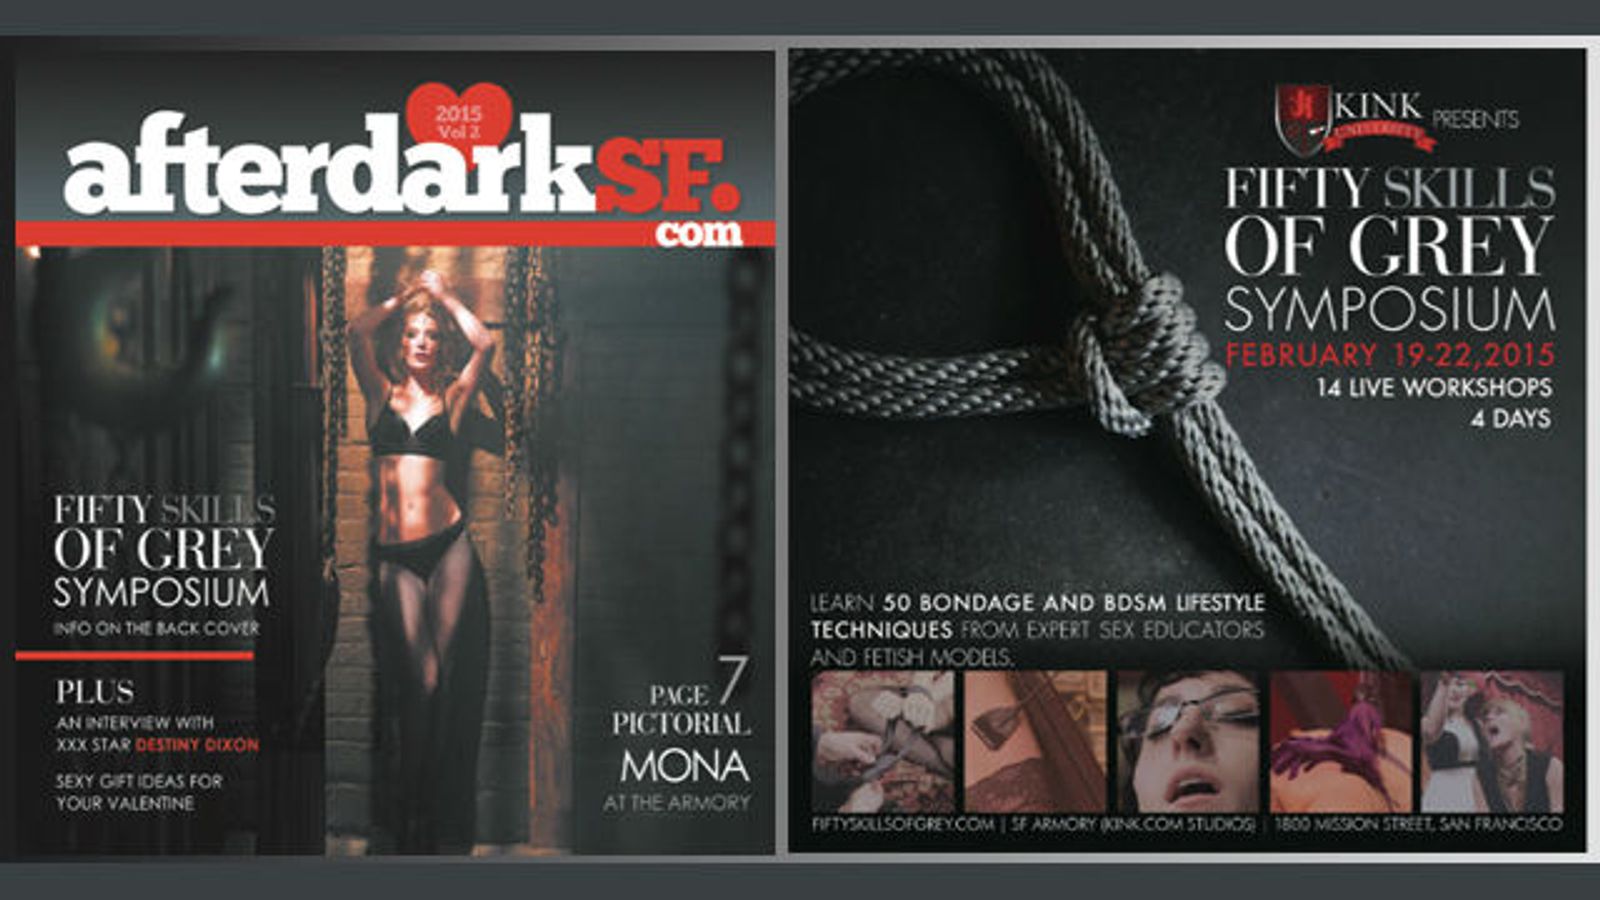 Mona Wales Featured In AfterDarkSF, Promoting 50 Skills of Kink